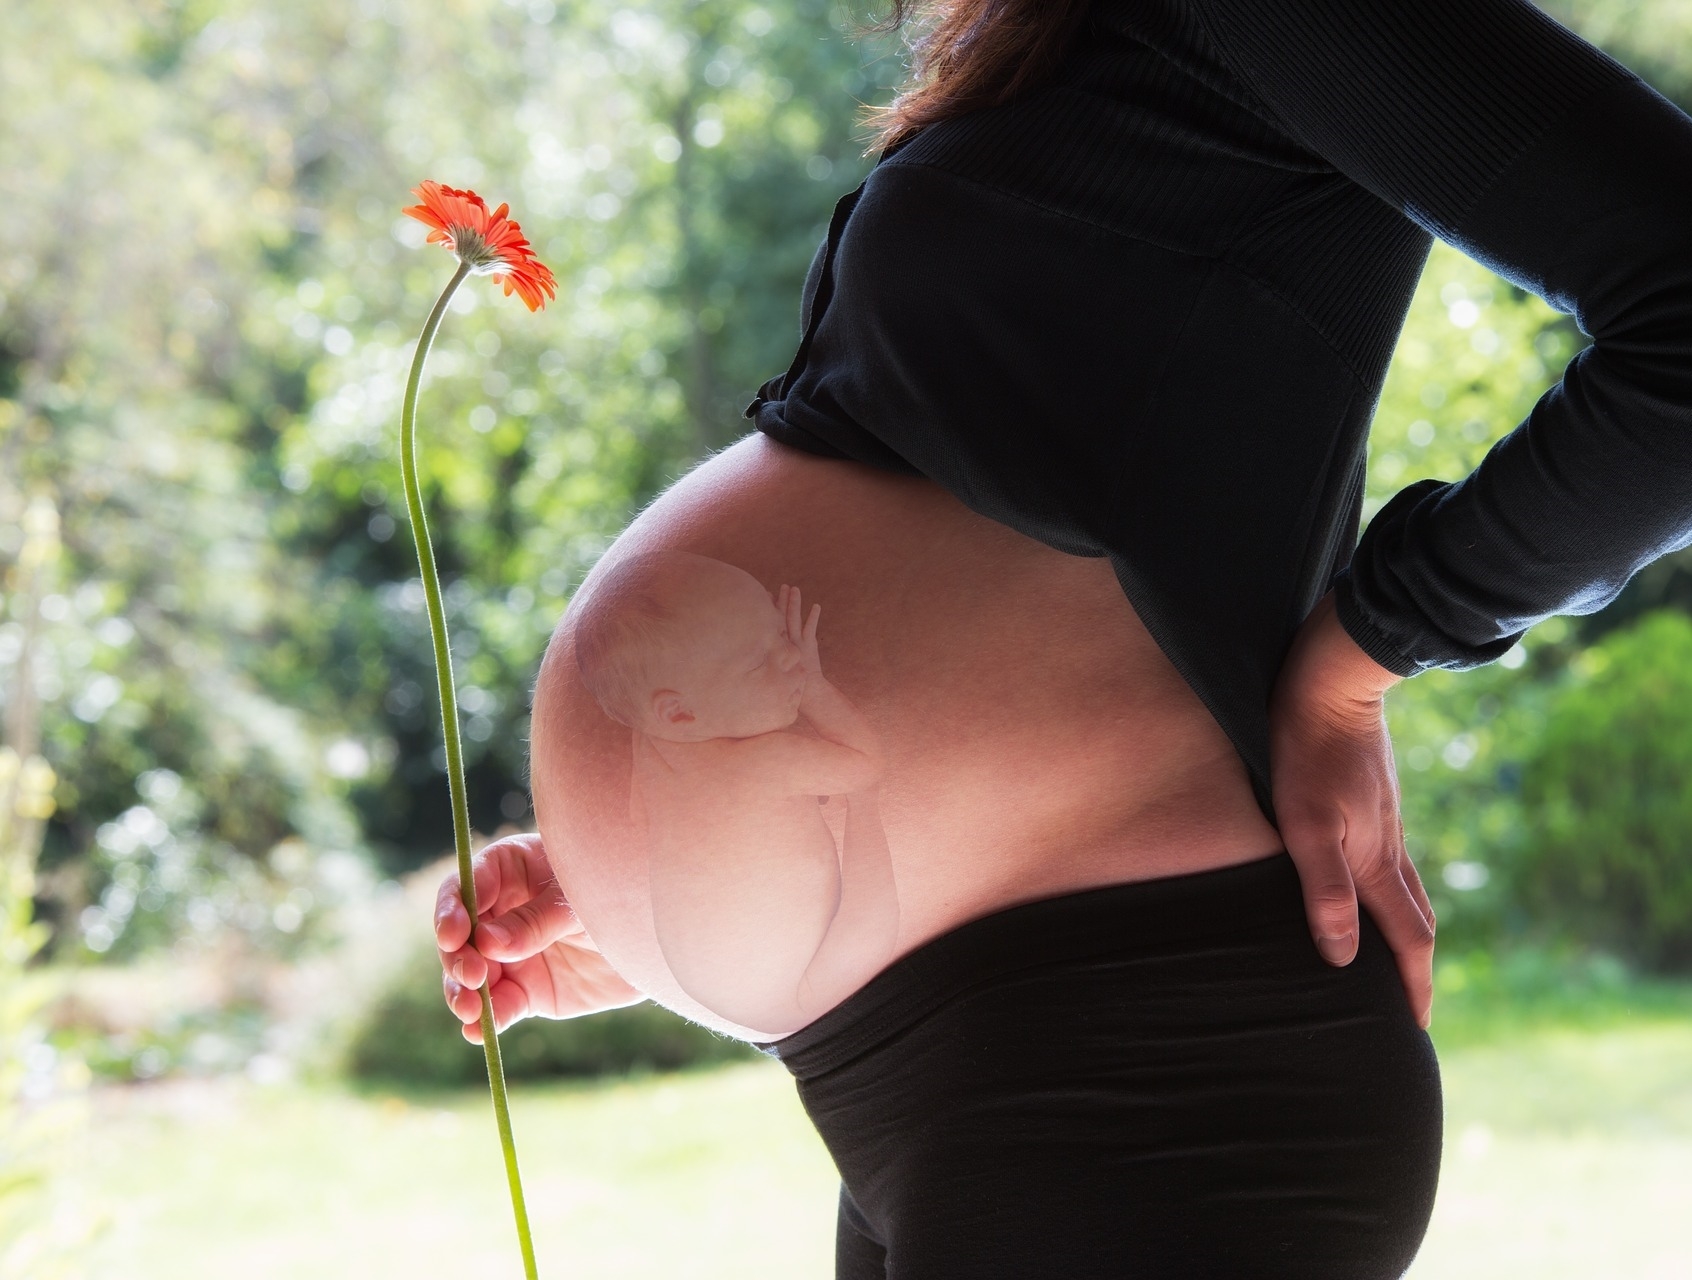 side view pregnant mother, black pants and top but womb area exposed, image of baby in womb area woman holding a flower